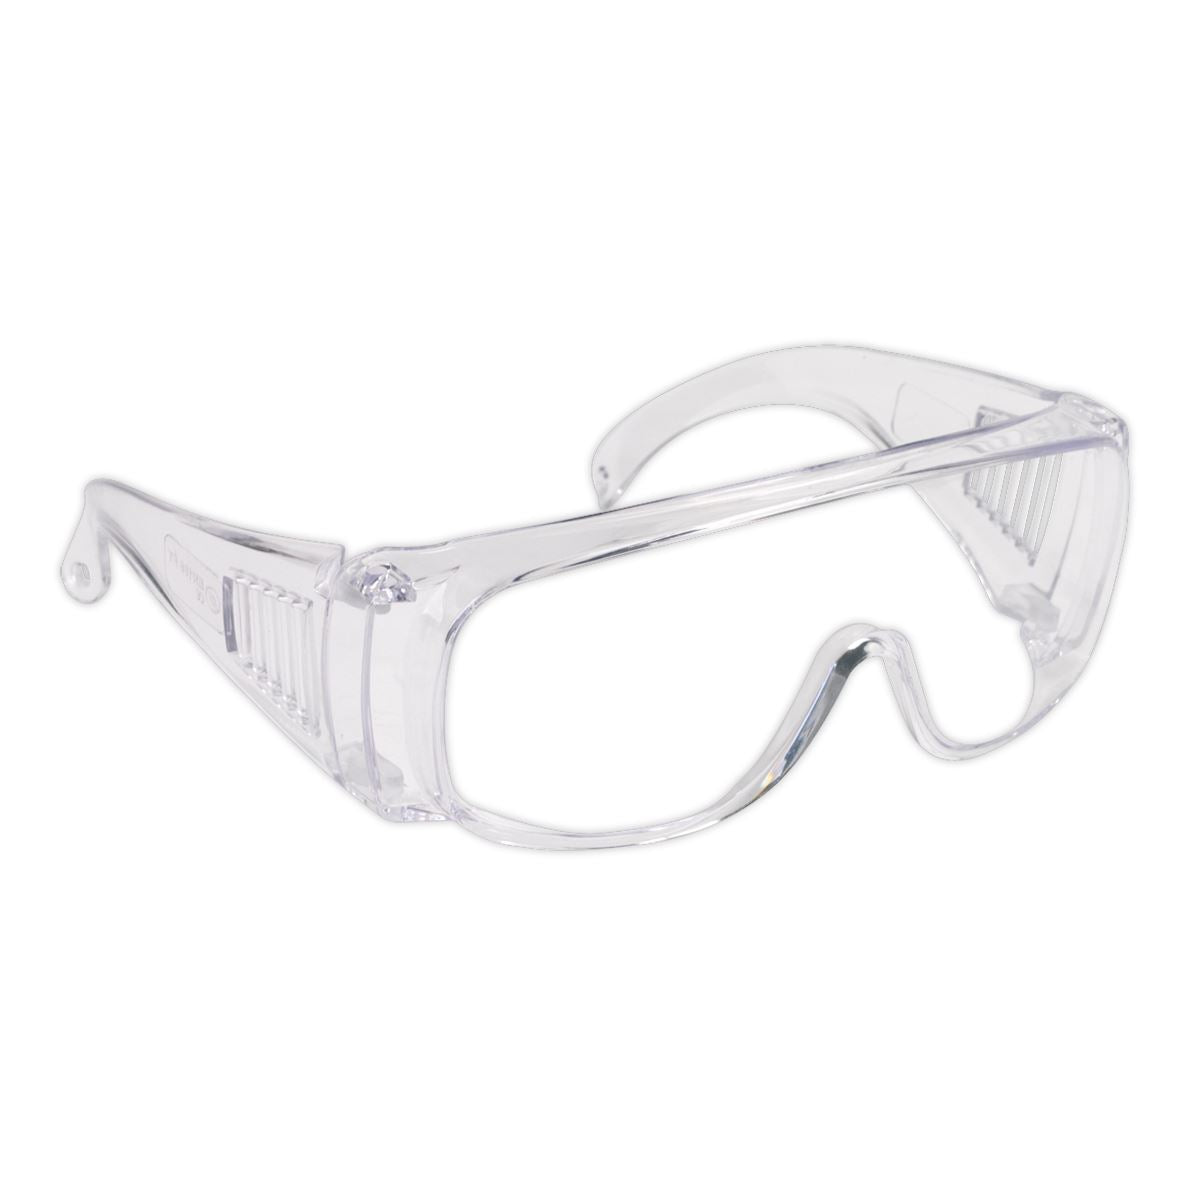 Worksafe by Sealey Safety Spectacles BS EN 166/F